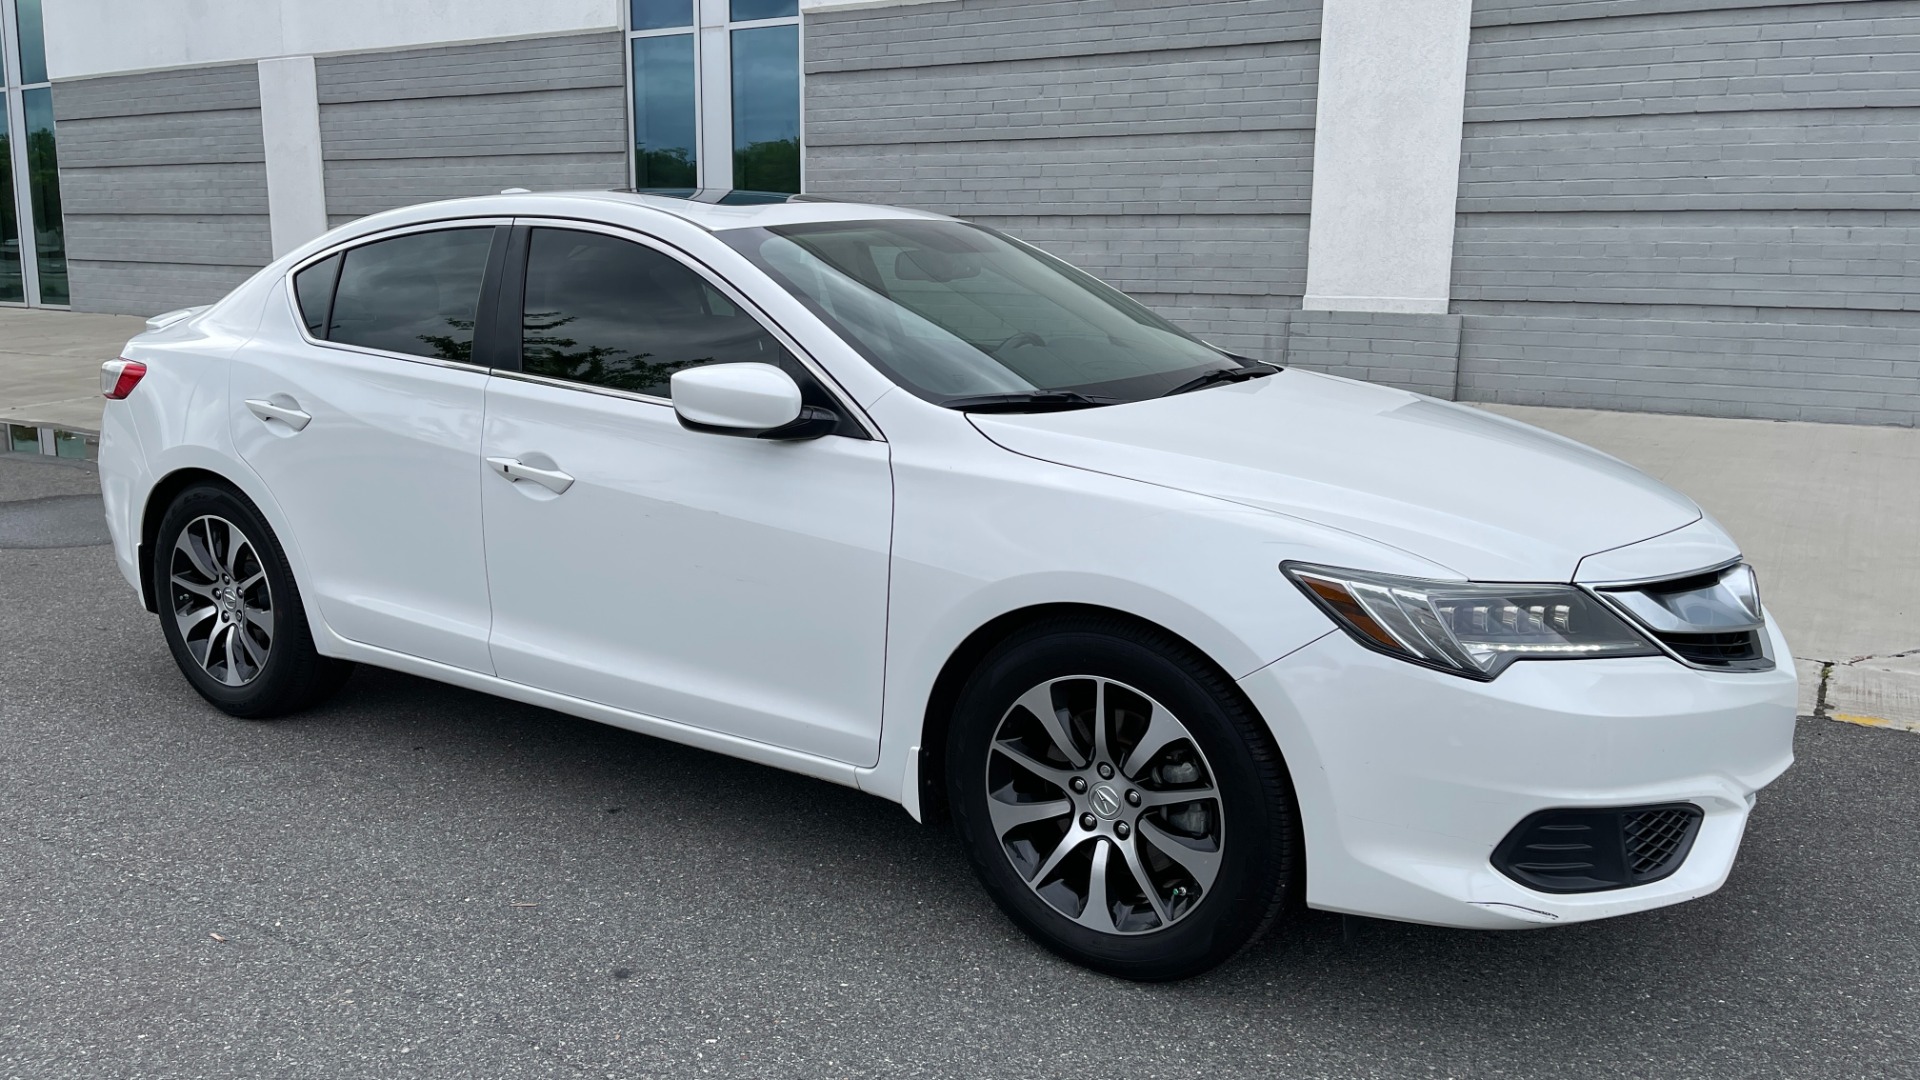 Used 2016 Acura ILX 4DR SEDAN / 2.4L I4 / FWD / STREAMING AUDIO / SUNROOF / REARVIEW for sale Sold at Formula Imports in Charlotte NC 28227 6